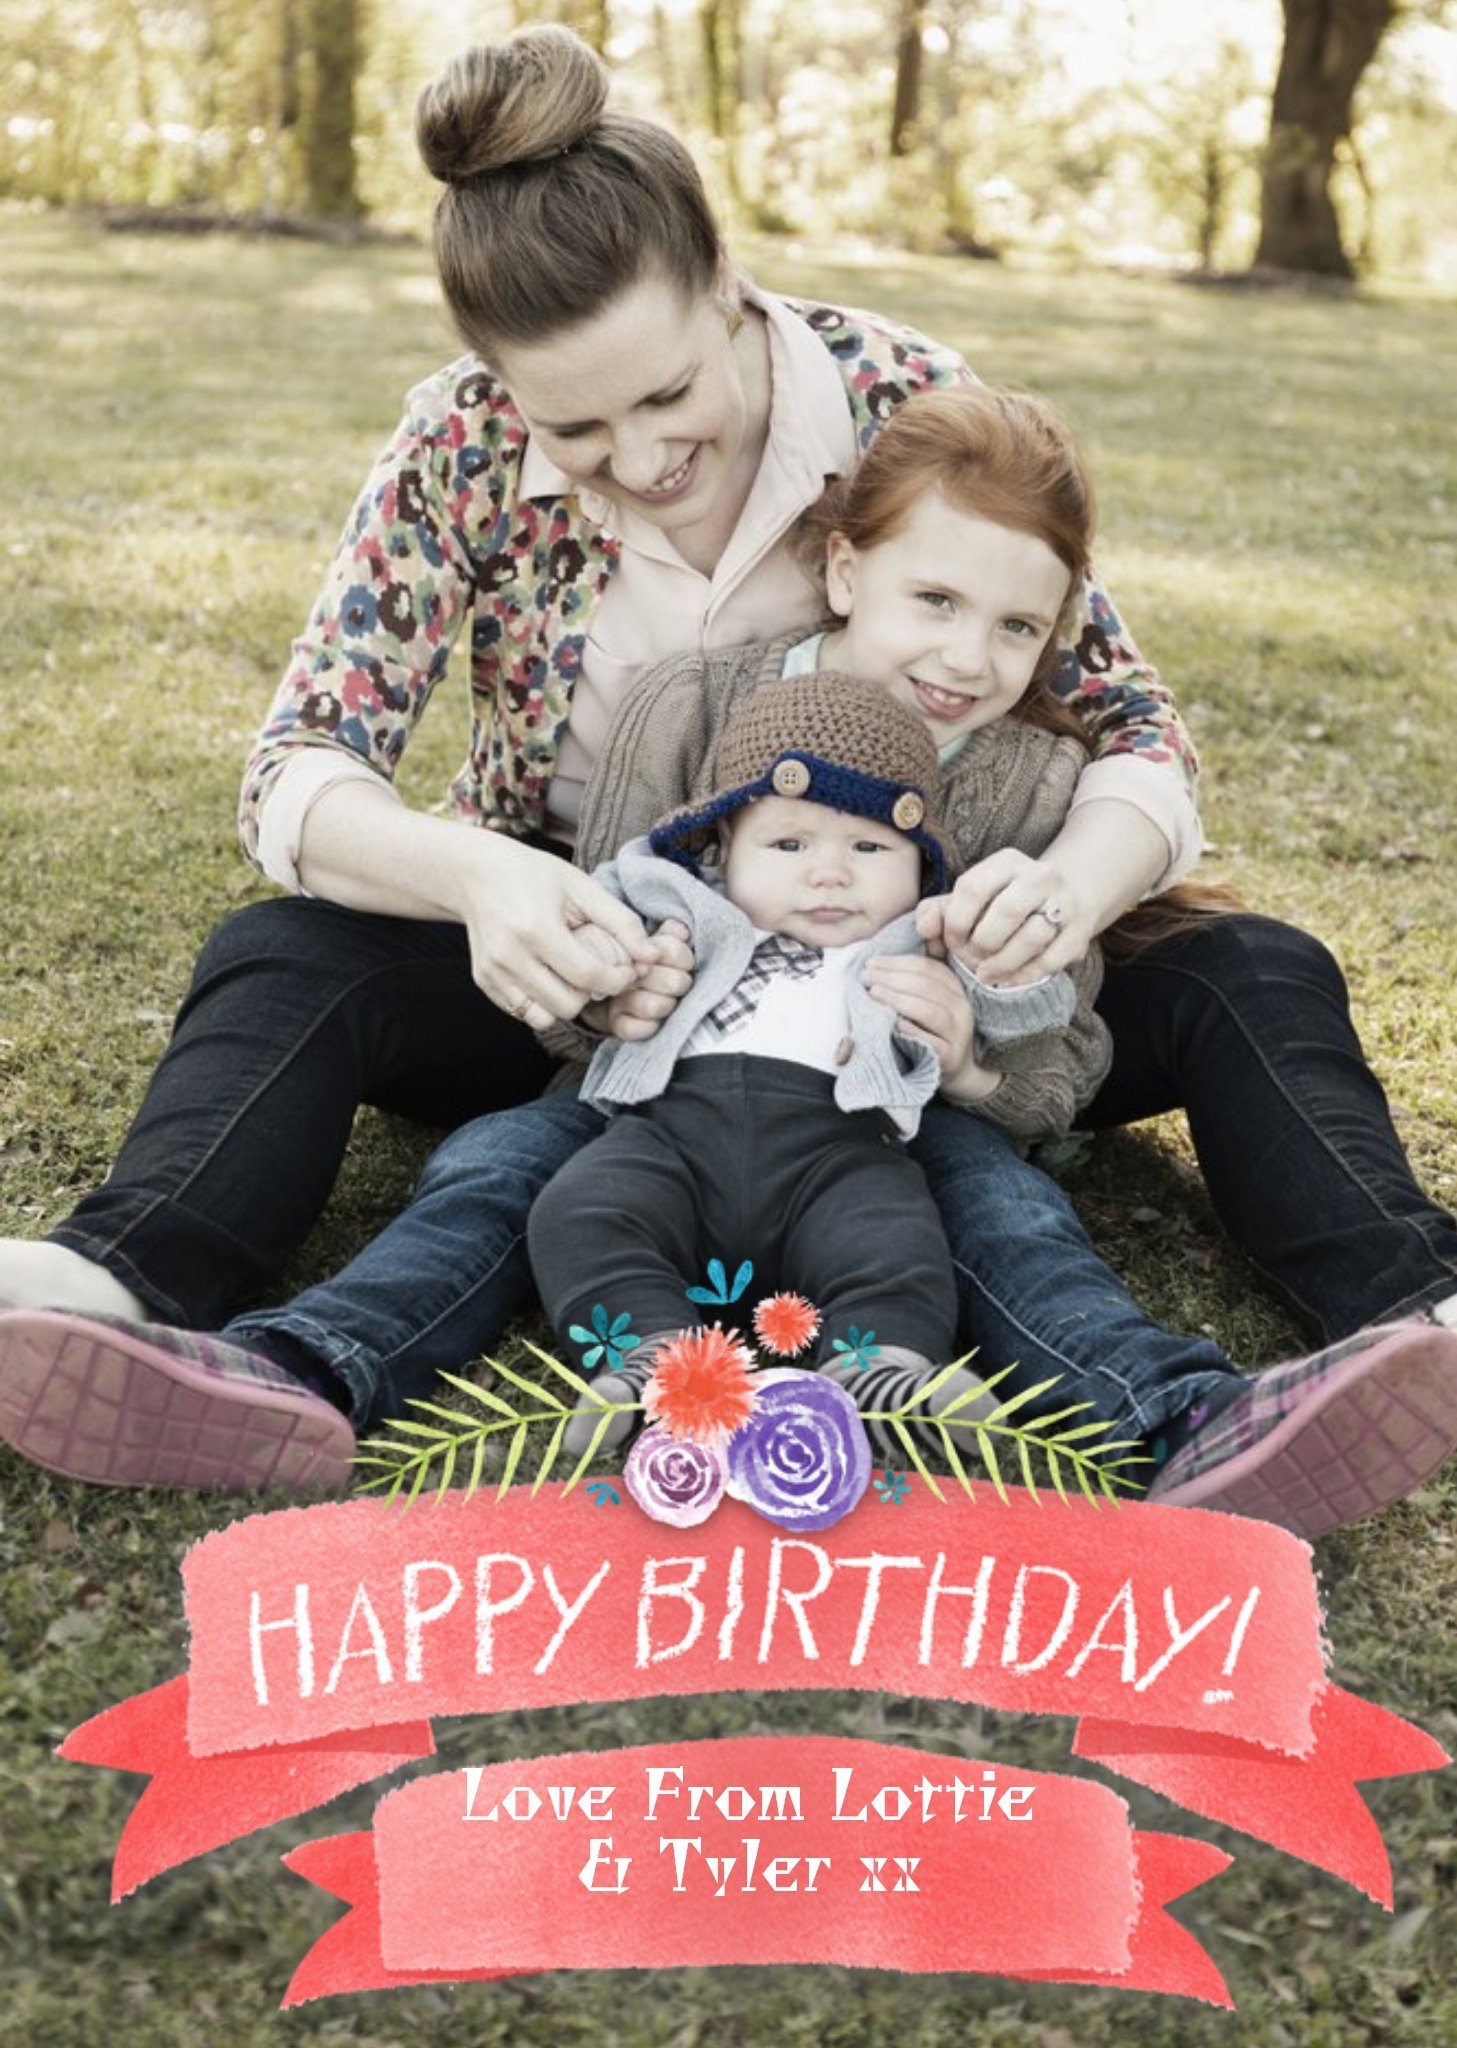 Moonpig Coral Birthday Banner With Floral Details Personalised Photo Upload Birthday Card, Large